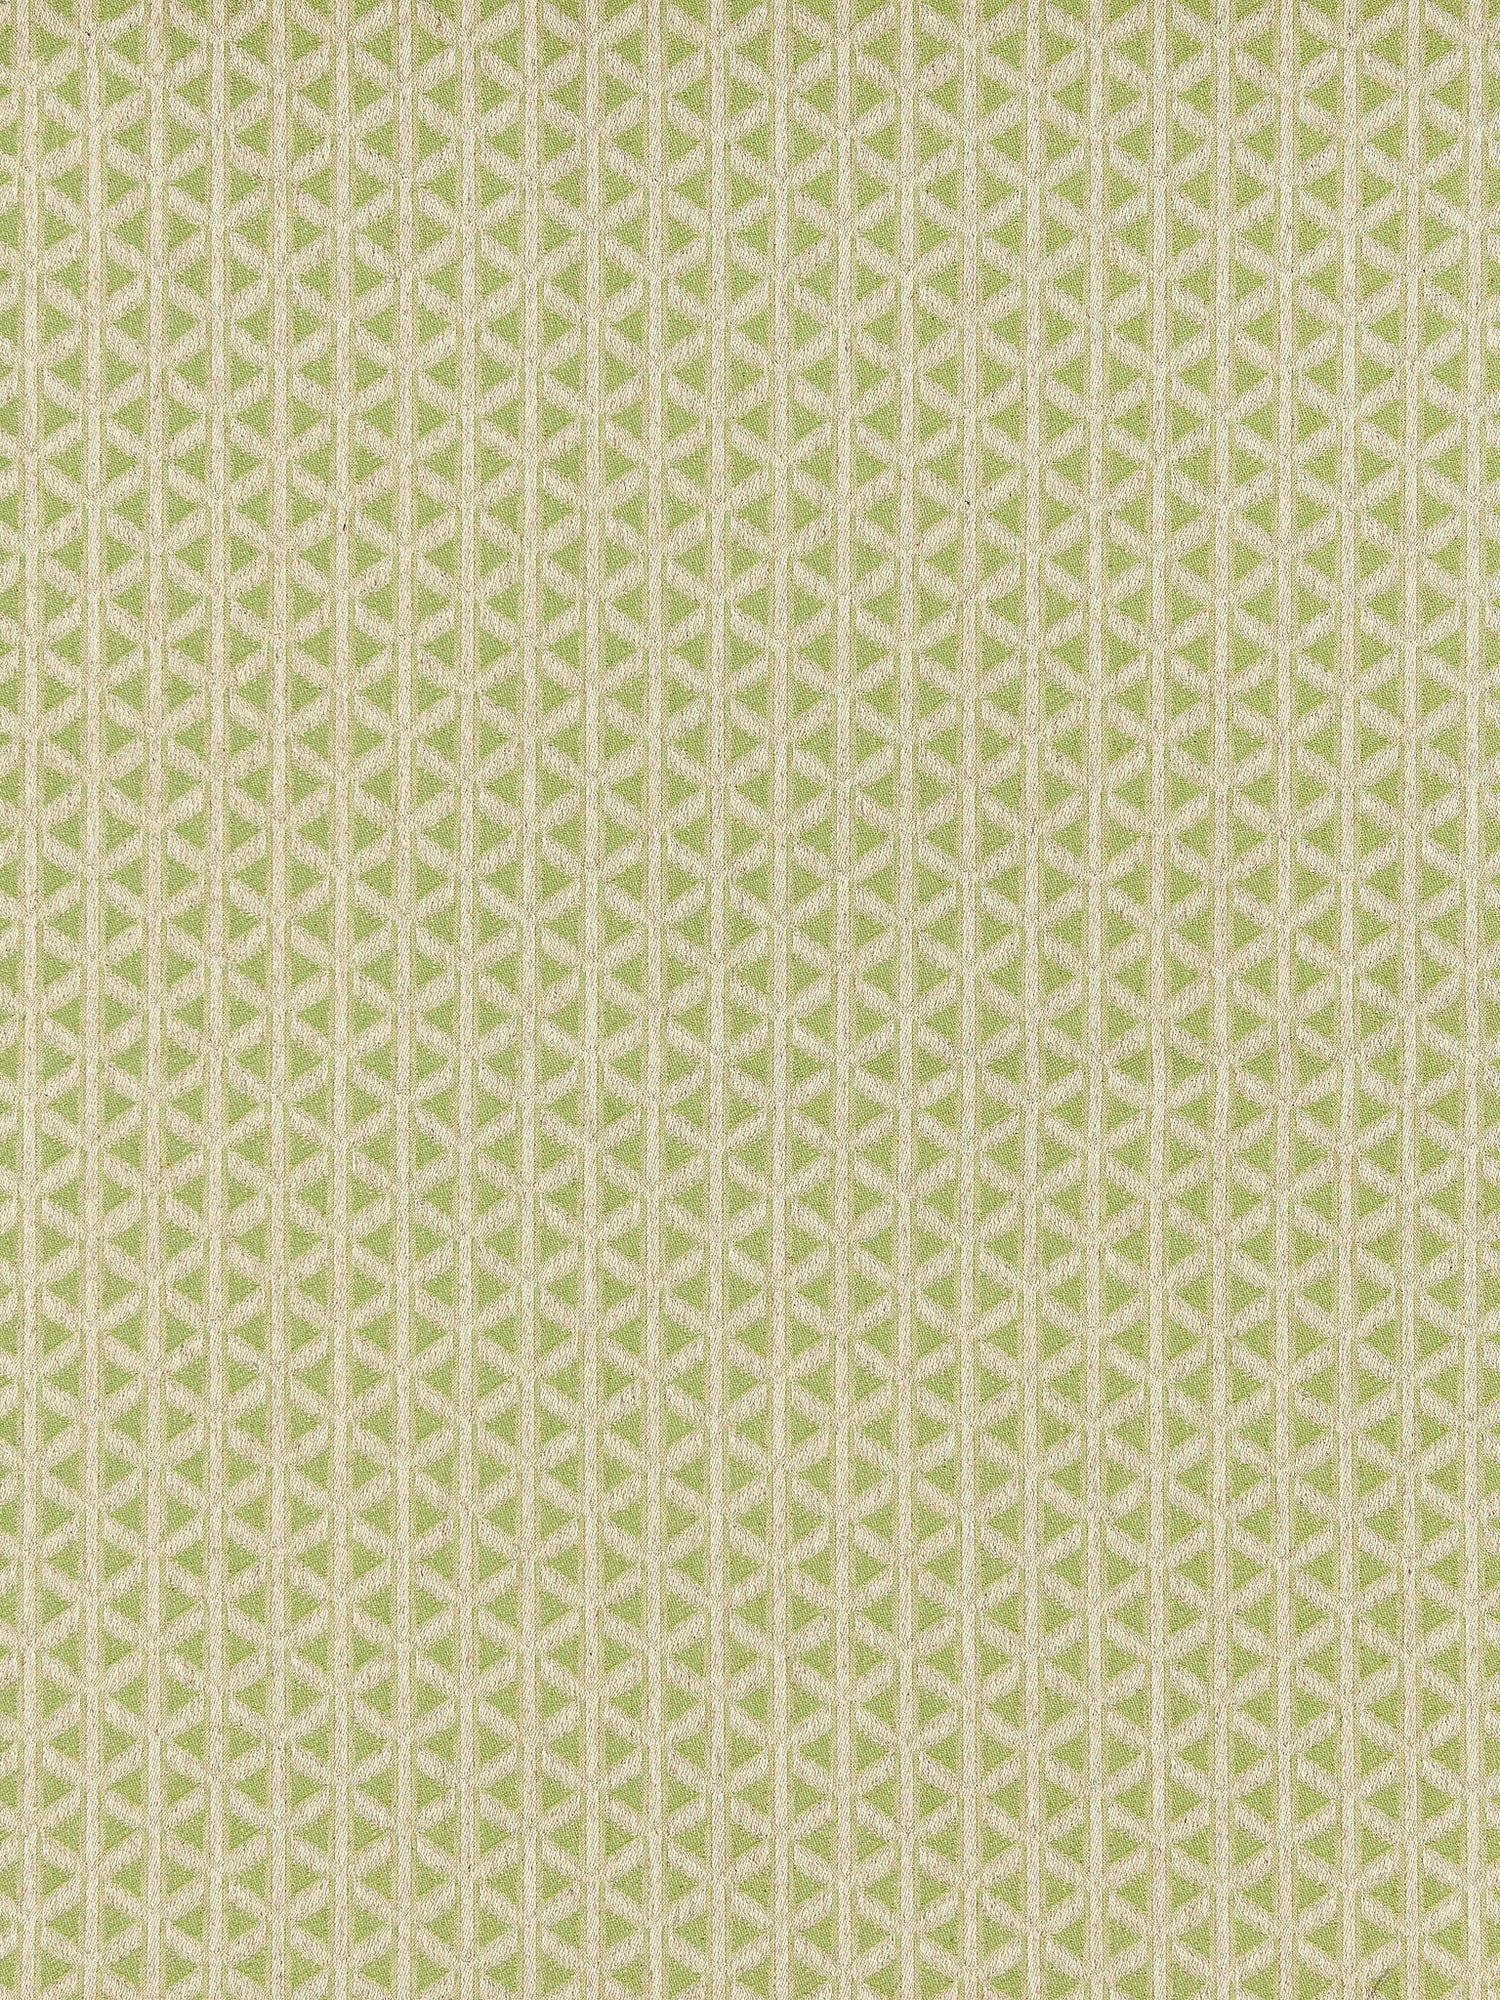 Cross Channel fabric in spring green color - pattern number NK 0003CROS - by Scalamandre in the Old World Weavers collection